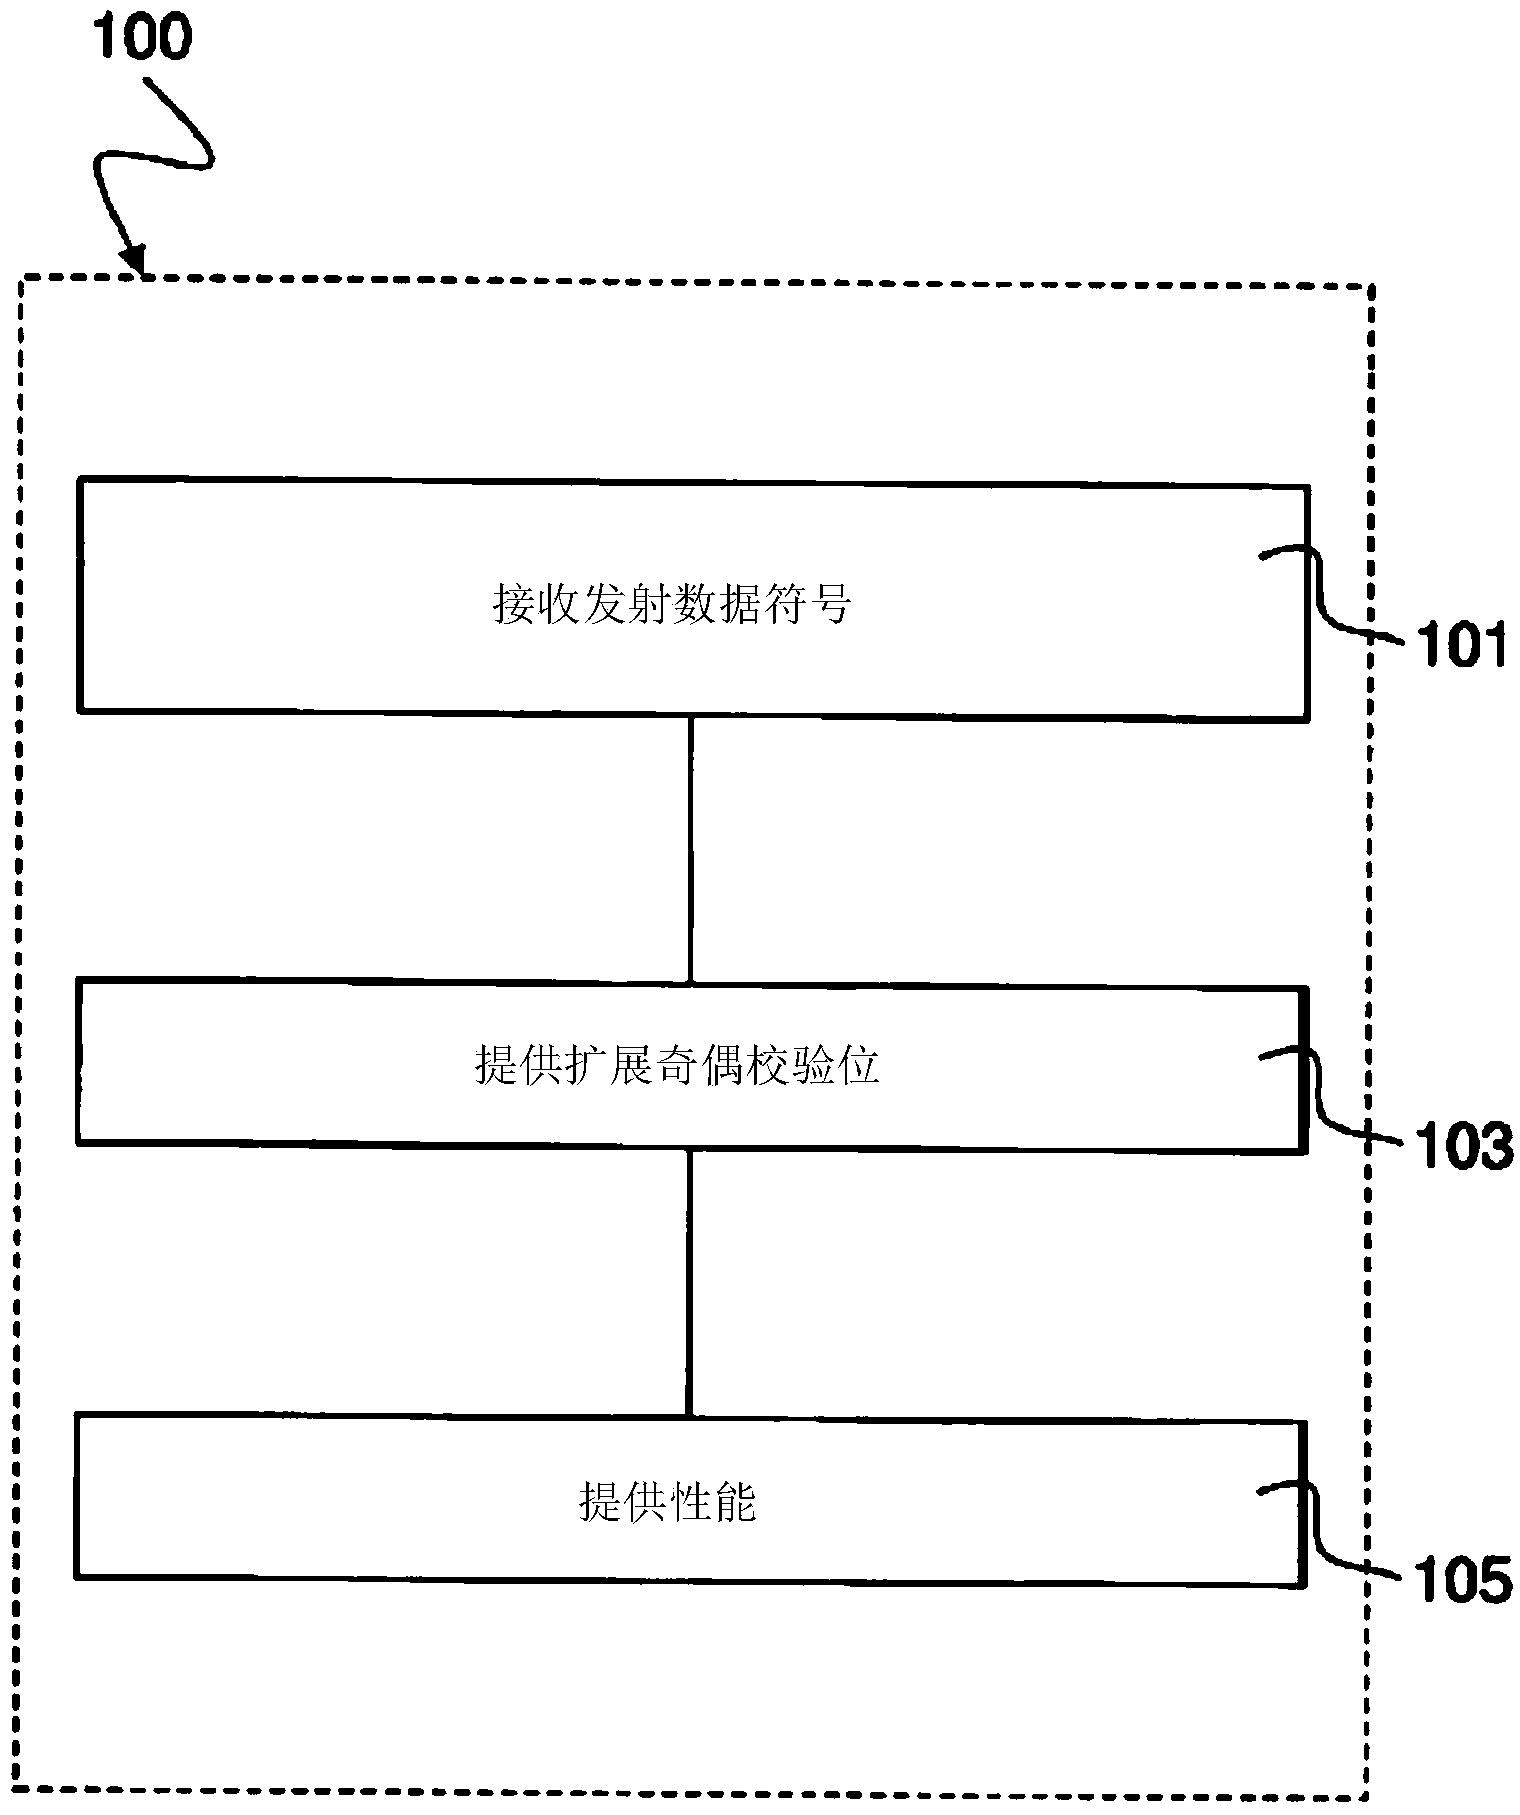 Method and device for performance evaluation of forward error correction (fec) codes